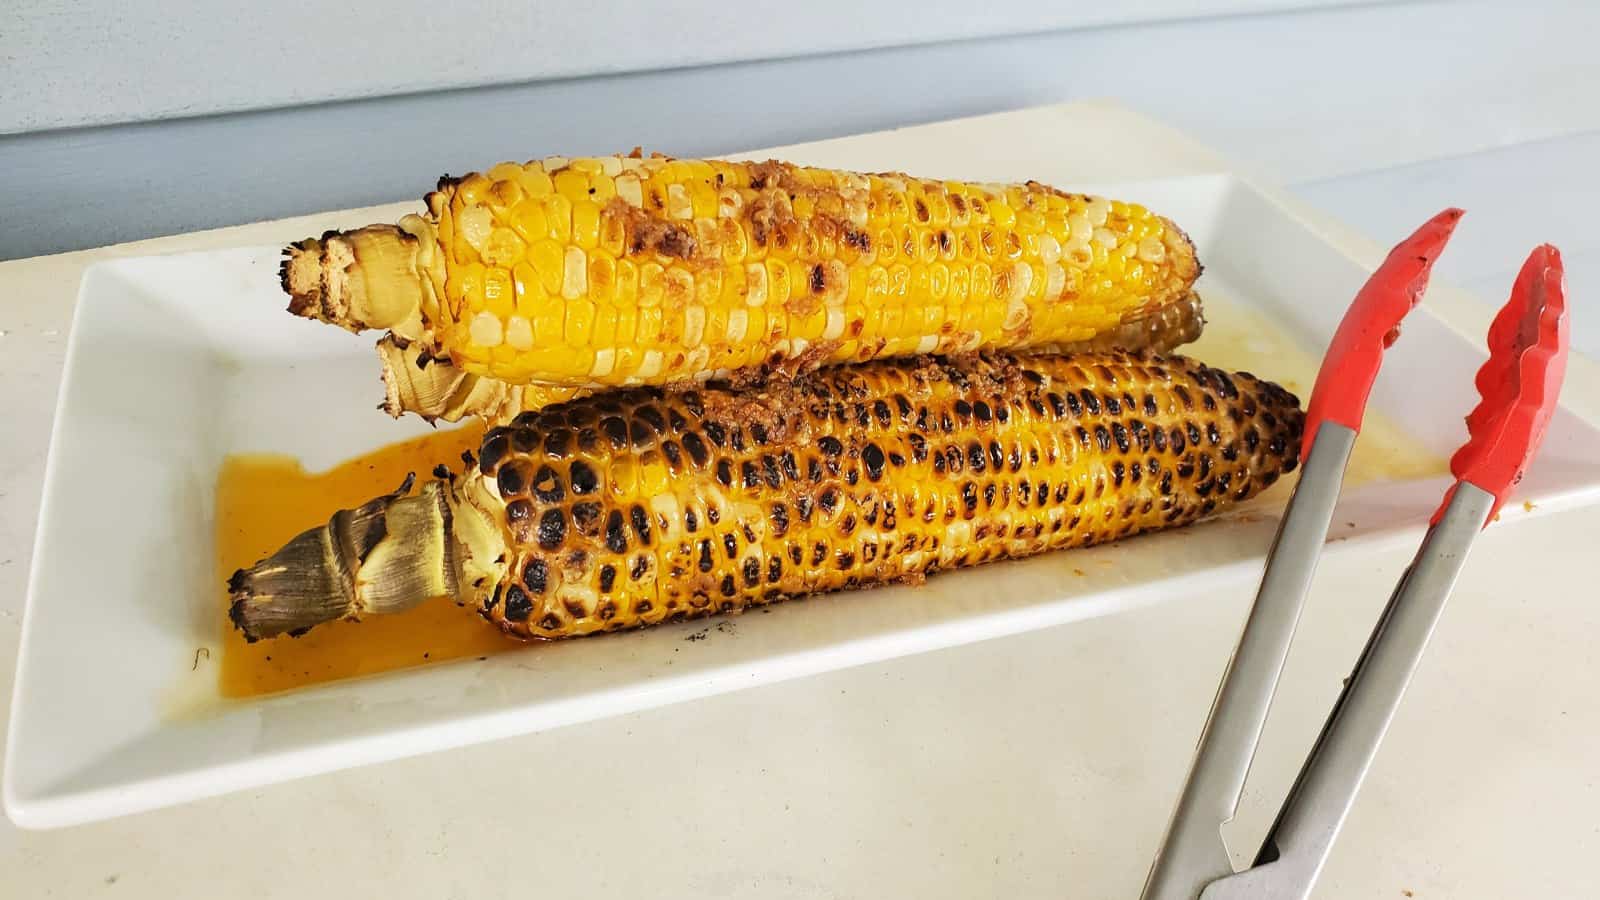 Image shows a white tray filled with chipotle grilled corn on the cob sitting on green grass.